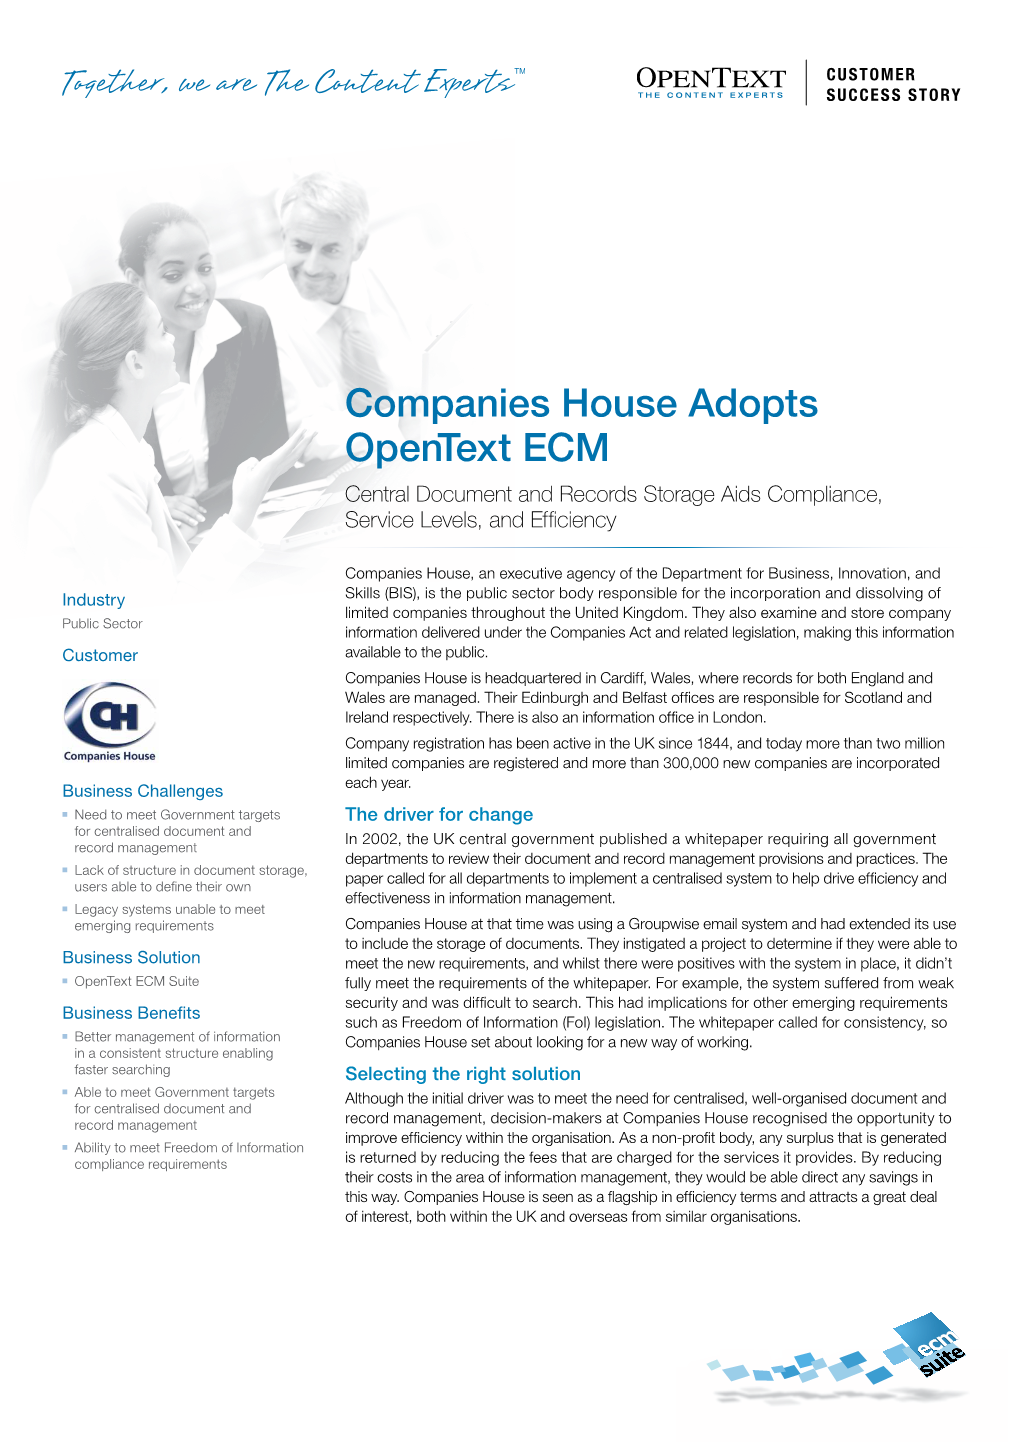 Companies House Adopts Opentext ECM Central Document and Records Storage Aids Compliance, Service Levels, and Efficiency